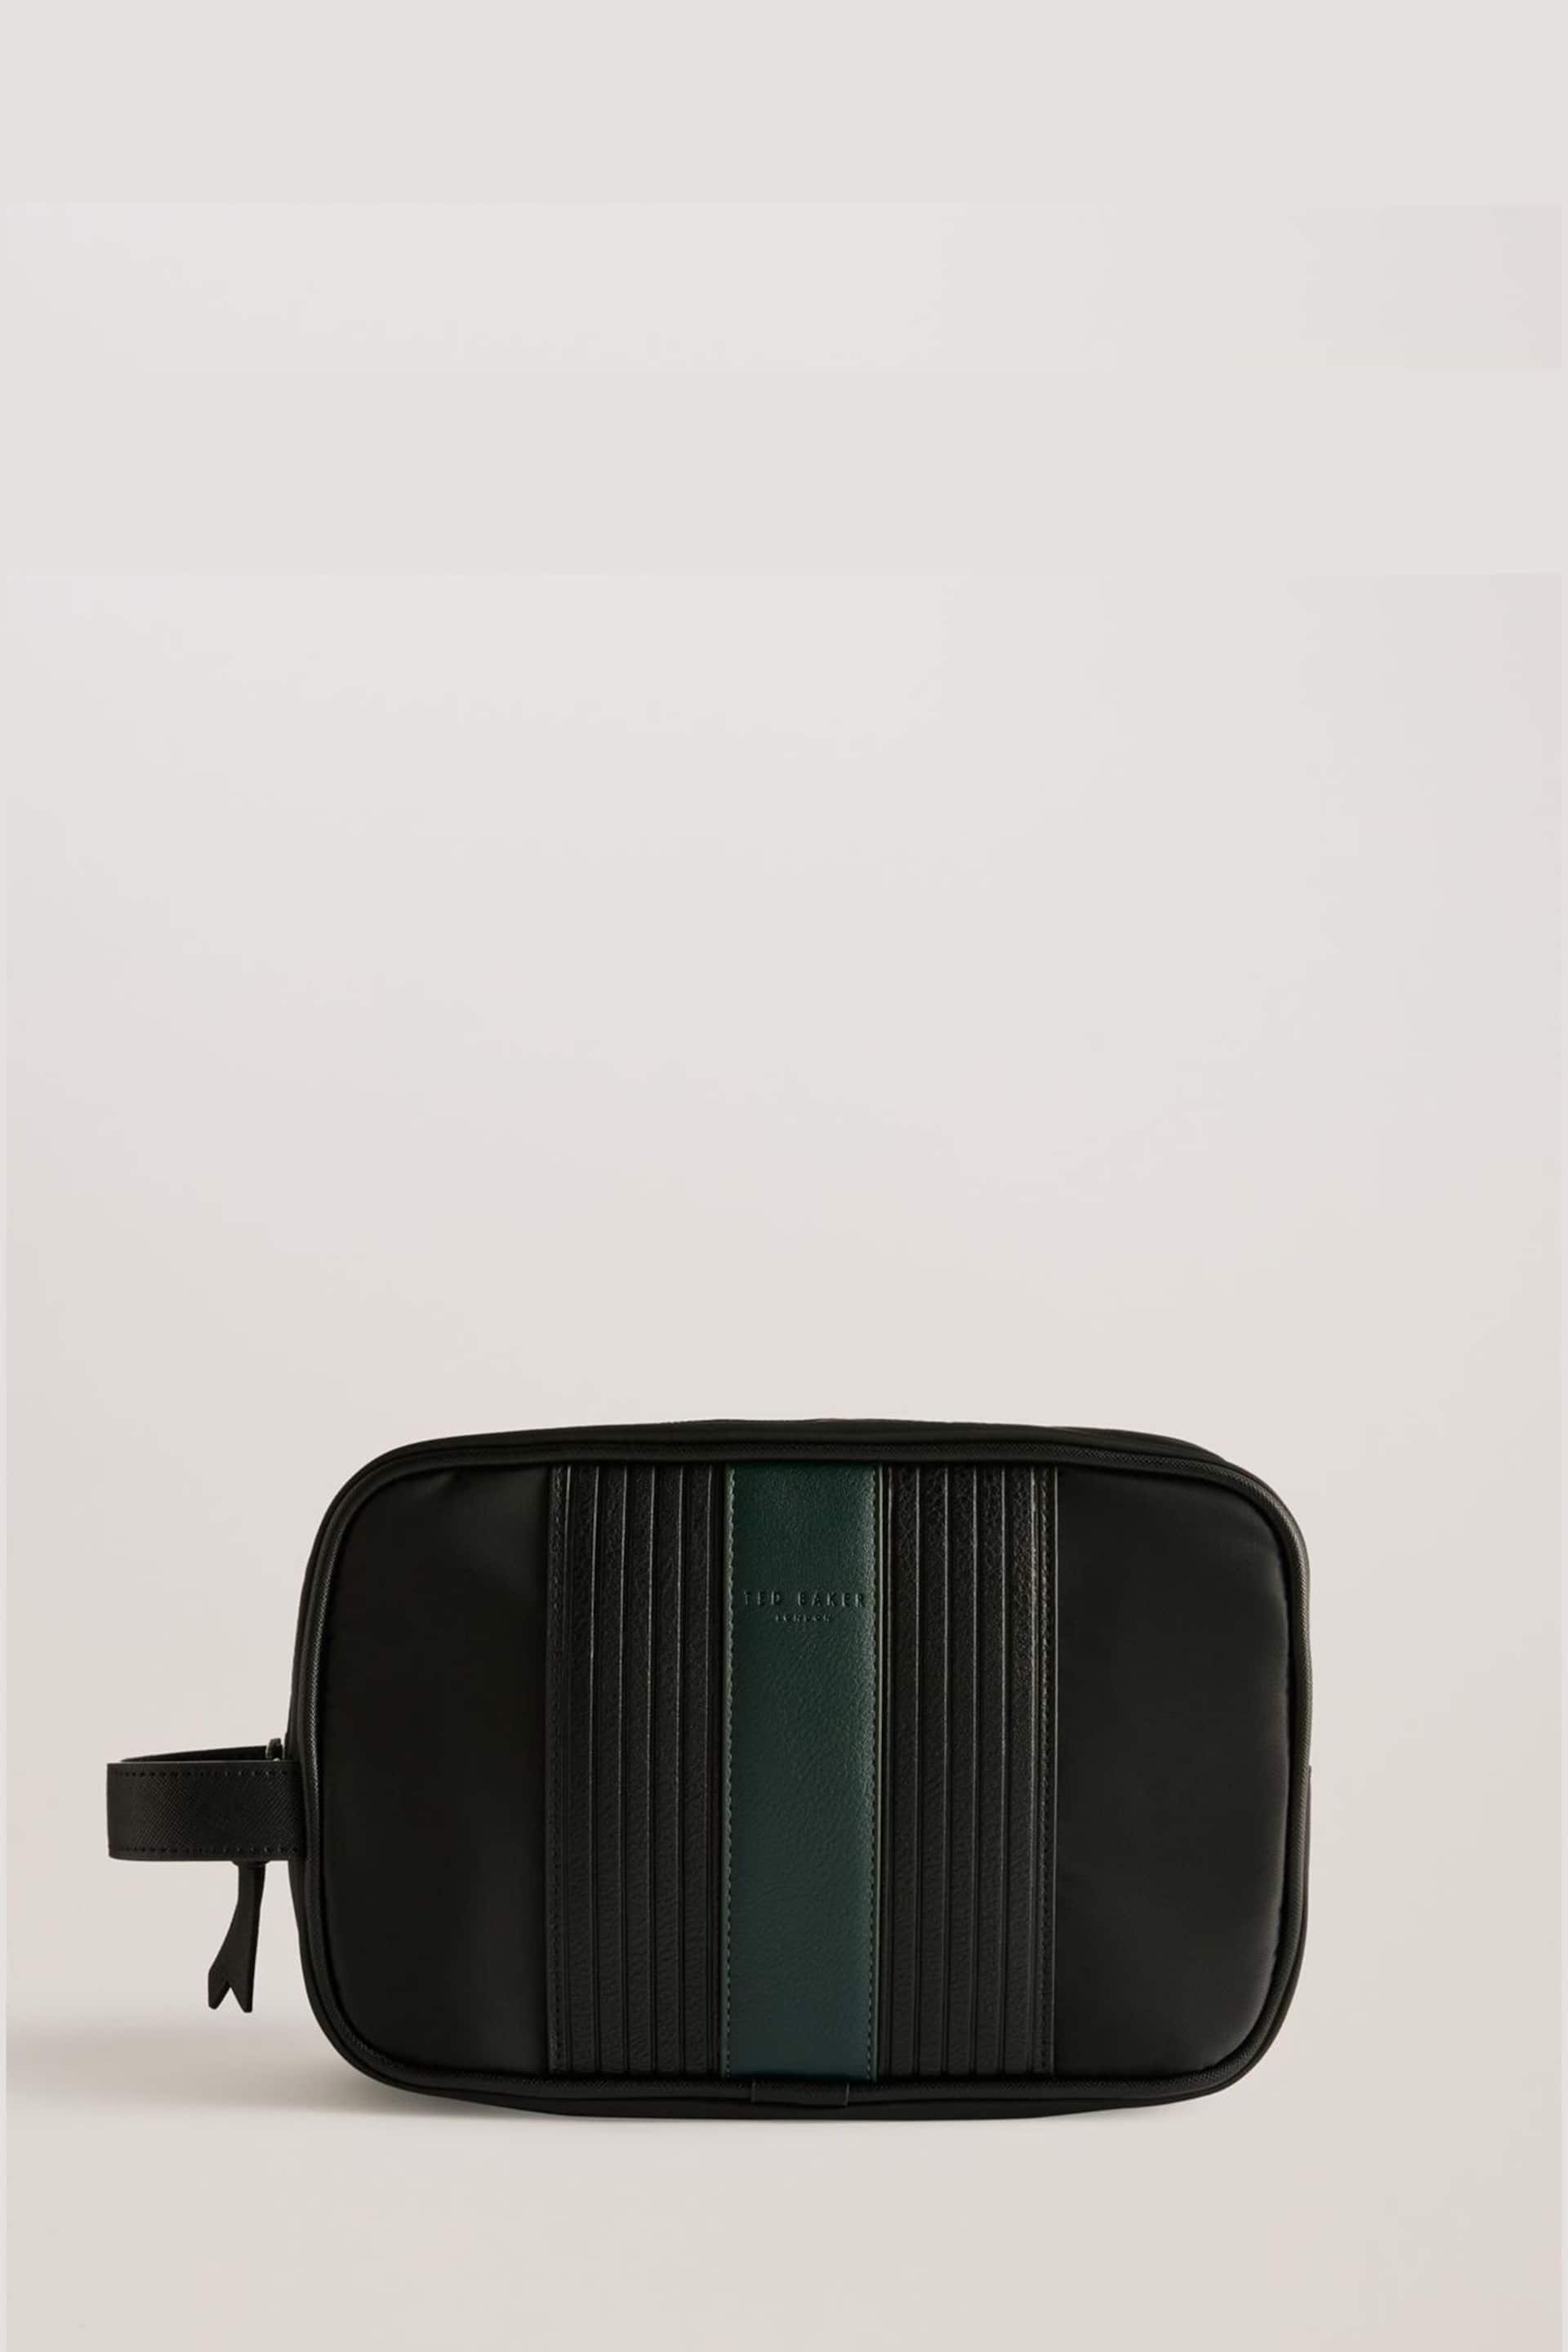 Ted Baker Black Russo Core Twill PU Striped Washbag - Image 1 of 4